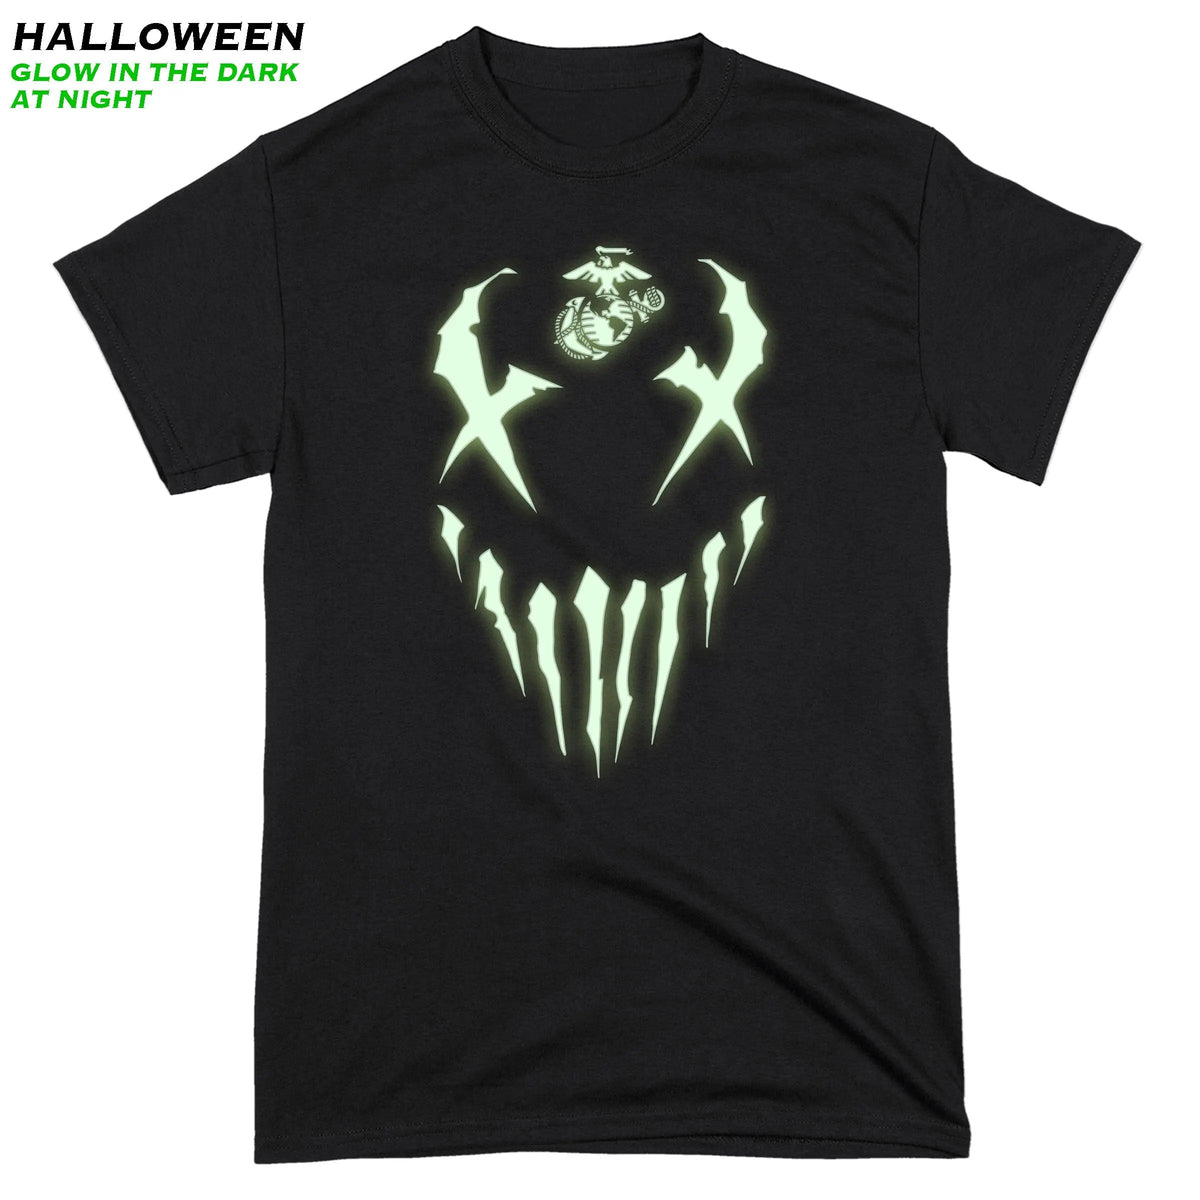 Limited Edition Glow In The Dark Halloween Marines T-Shirt